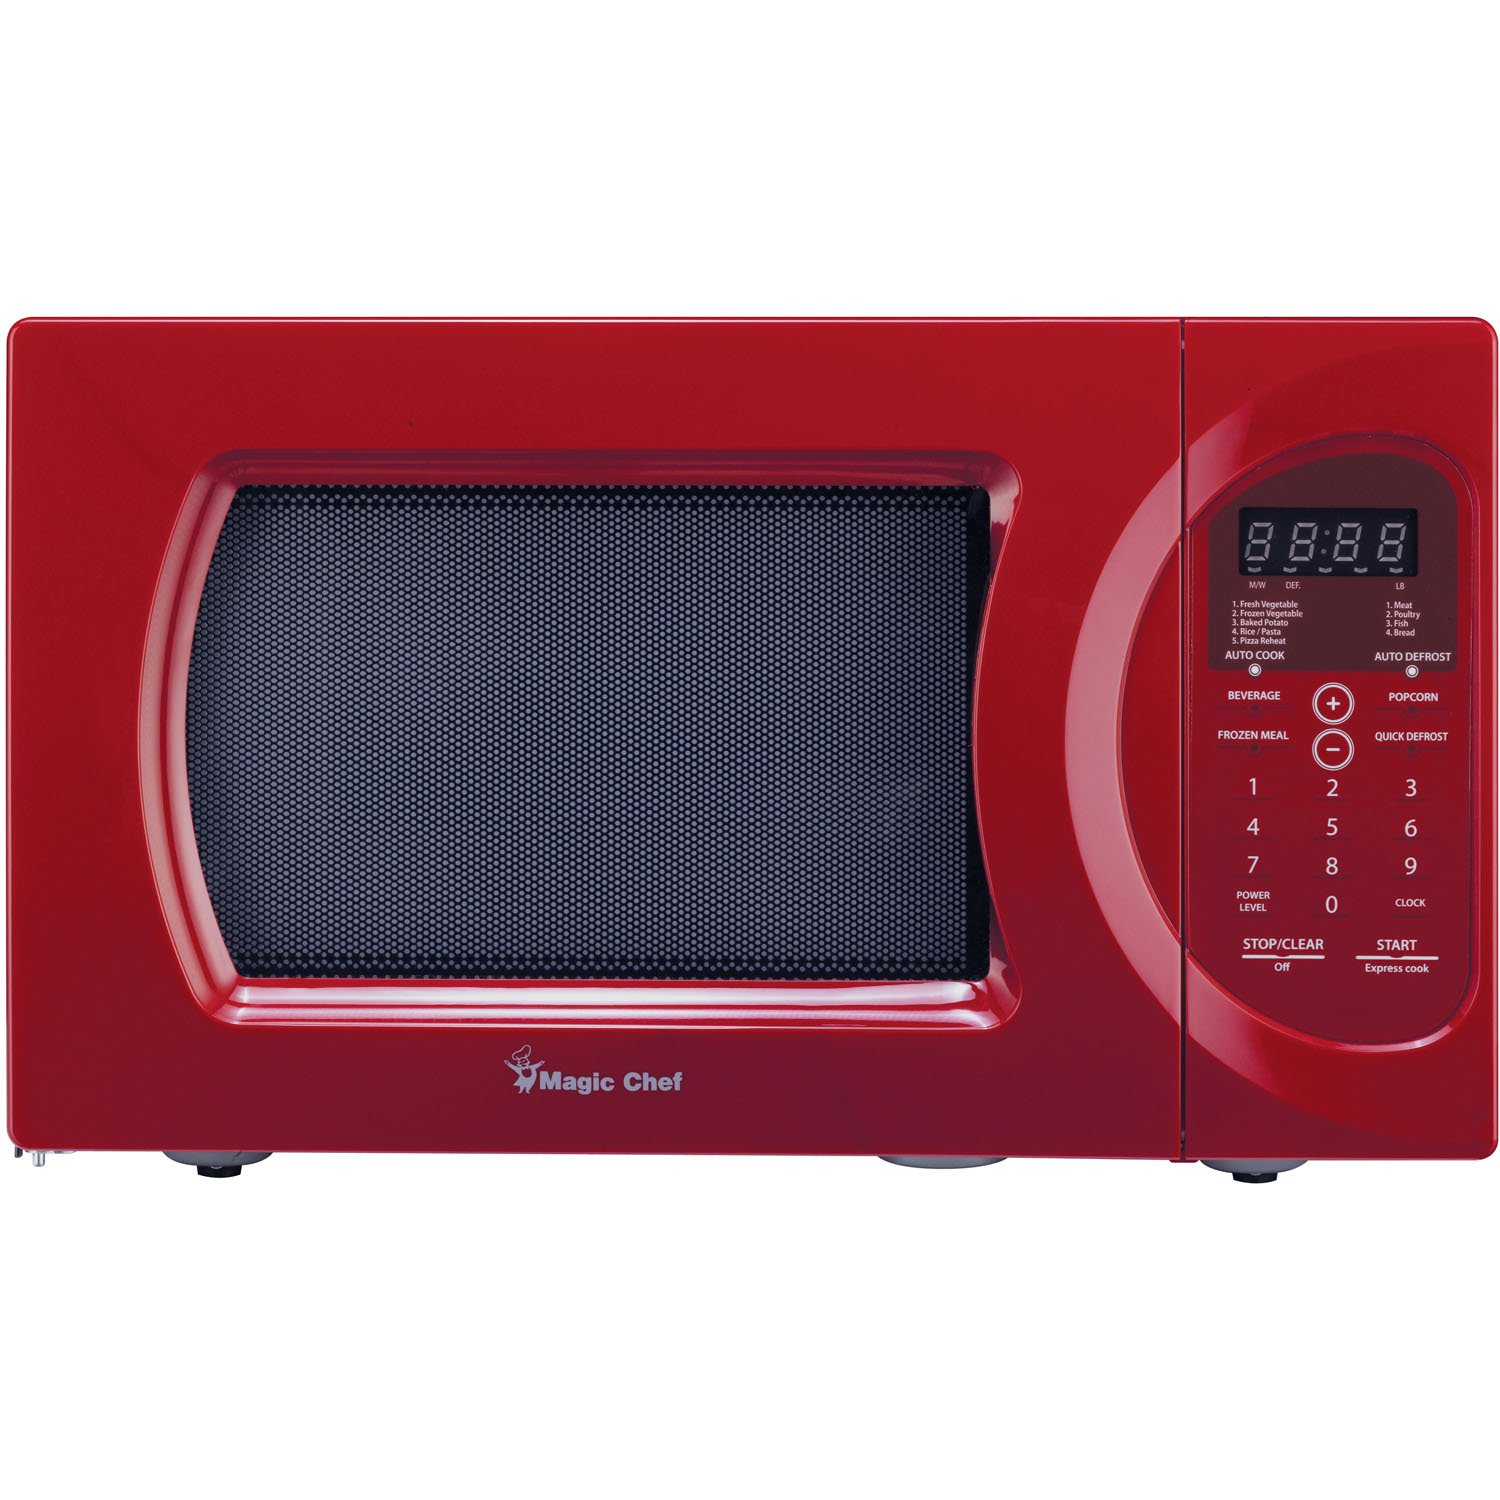 Magic Chef Mcd992r 0 9 Cu Ft 900w Oven In Red Countertop